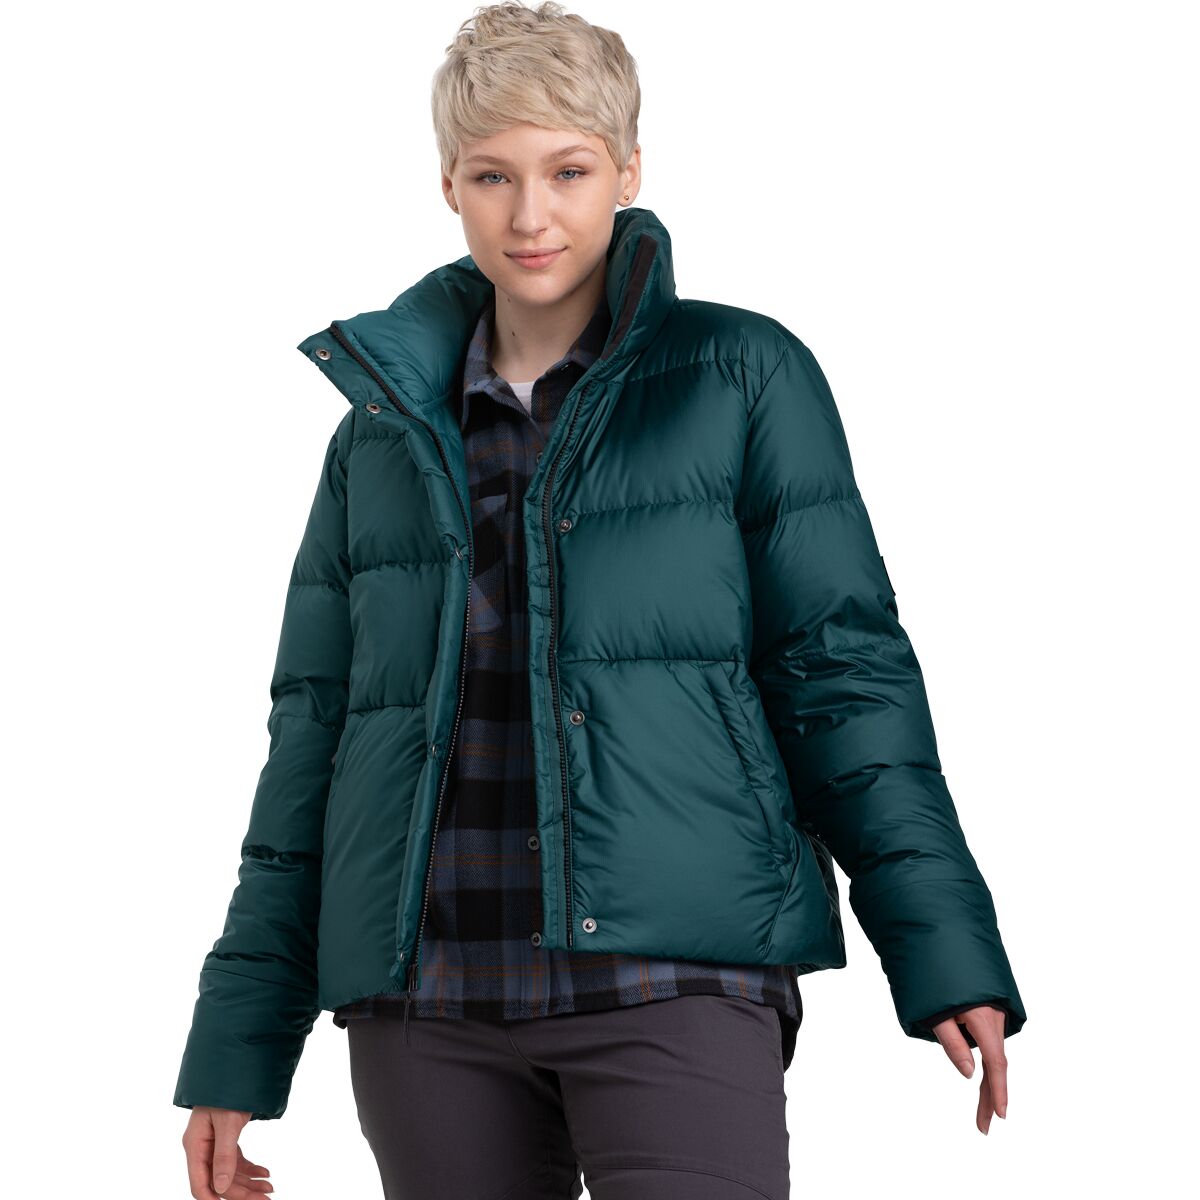 Outdoor Research Coldfront Down Jacket - Women's